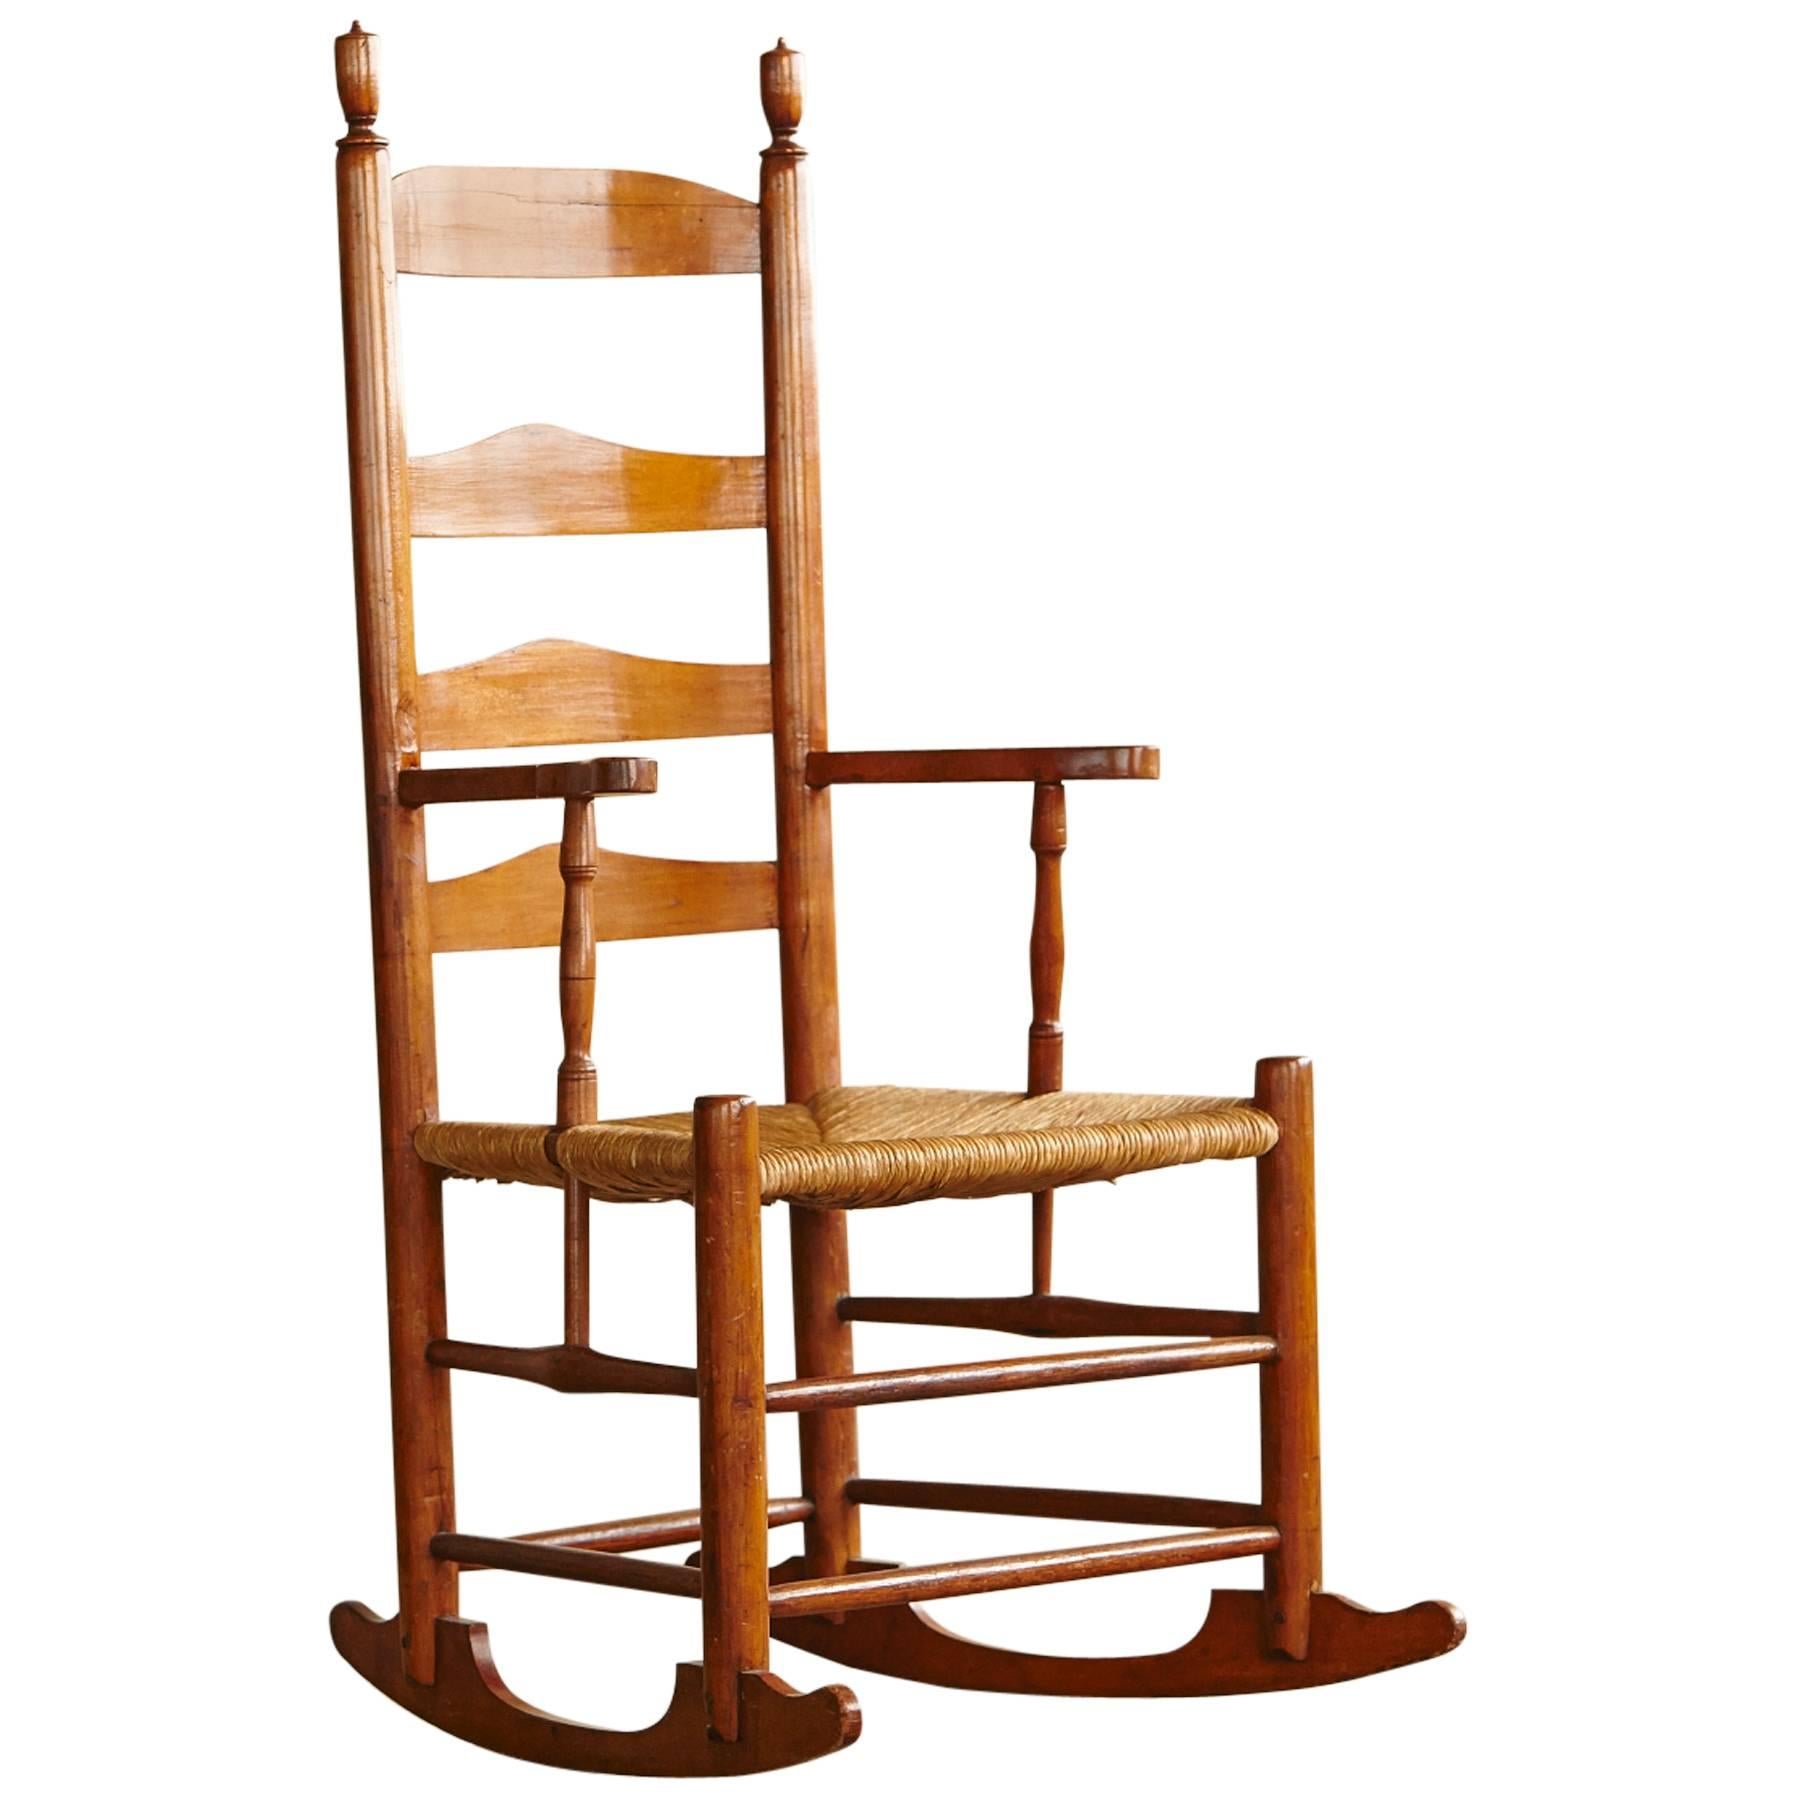 Early American Ladder Back Rocking Chair with Rush Seat, circa 1830